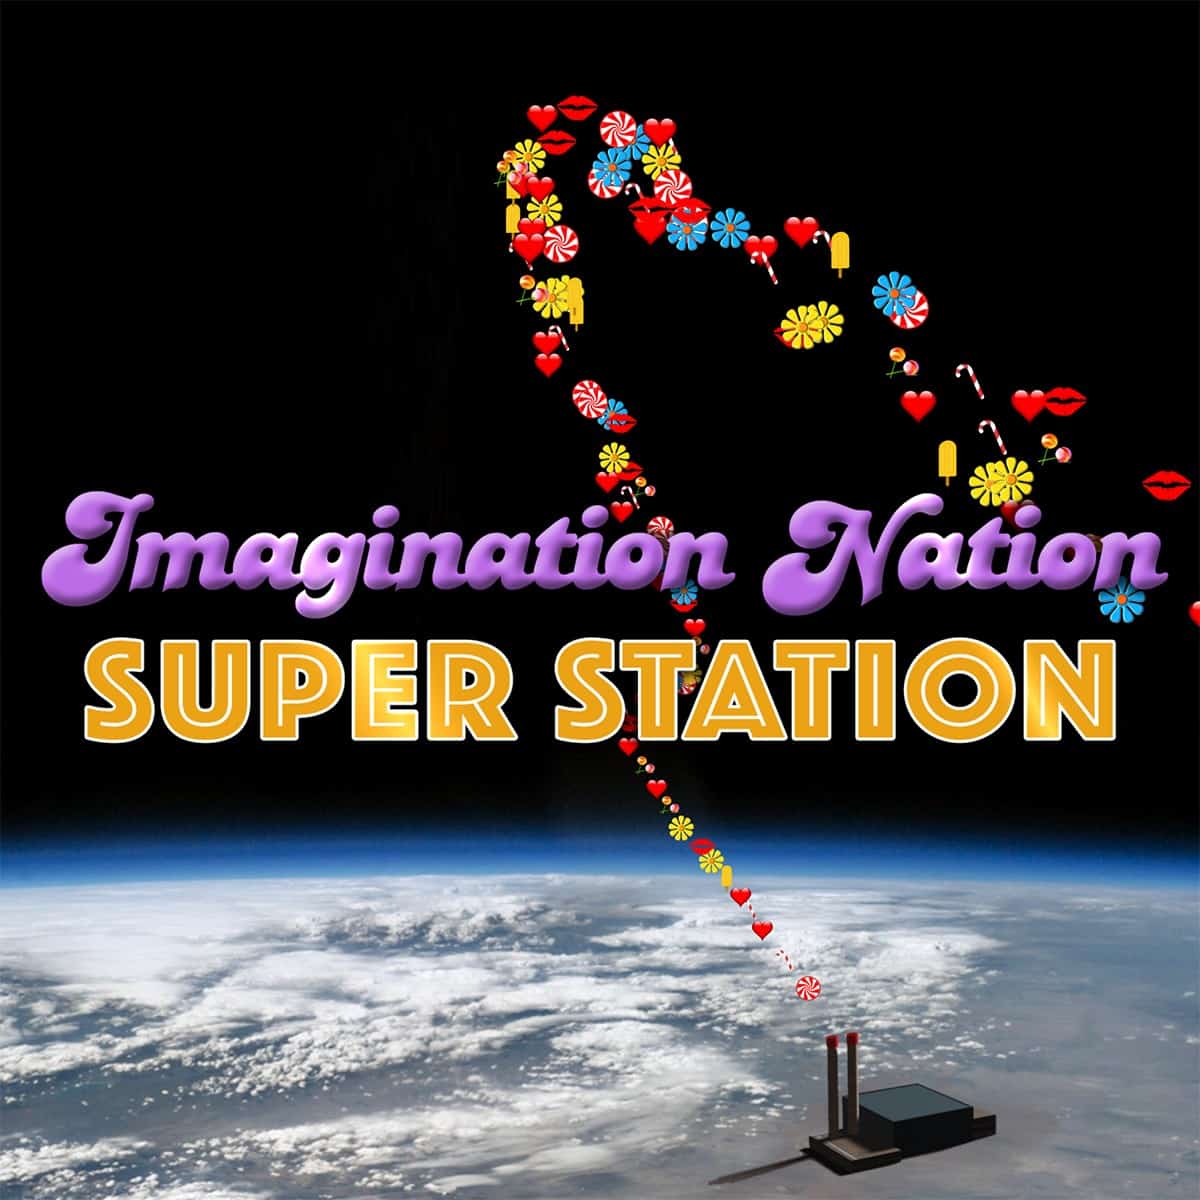 Imagination Nation Super Station – family-friendly interactive multi-media show loads up laughs at Santa Monica Playhouse